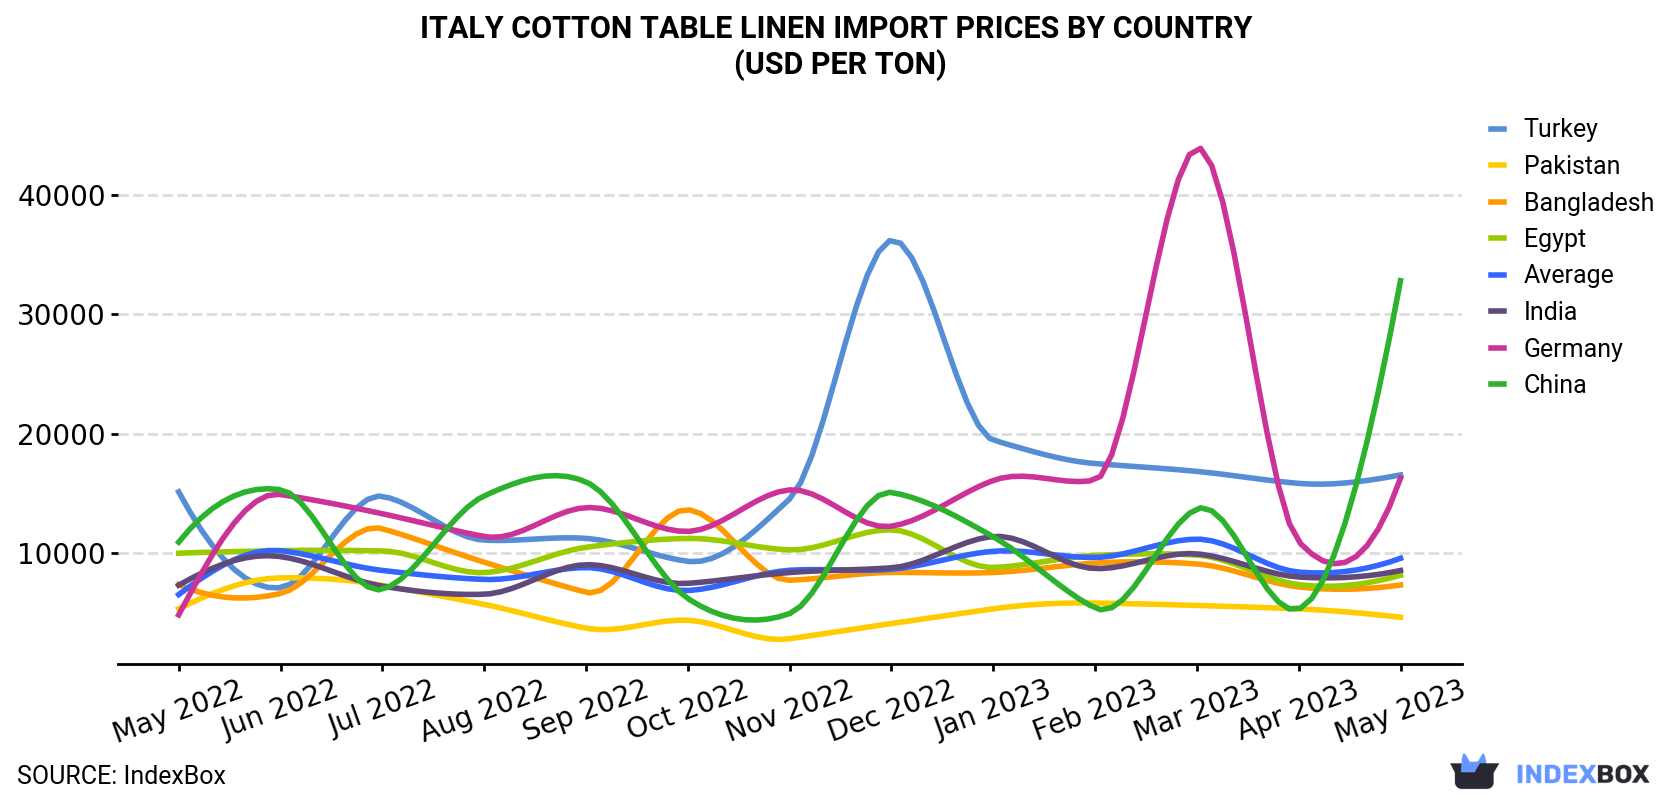 Italy Cotton Table Linen Import Prices By Country (USD Per Ton)